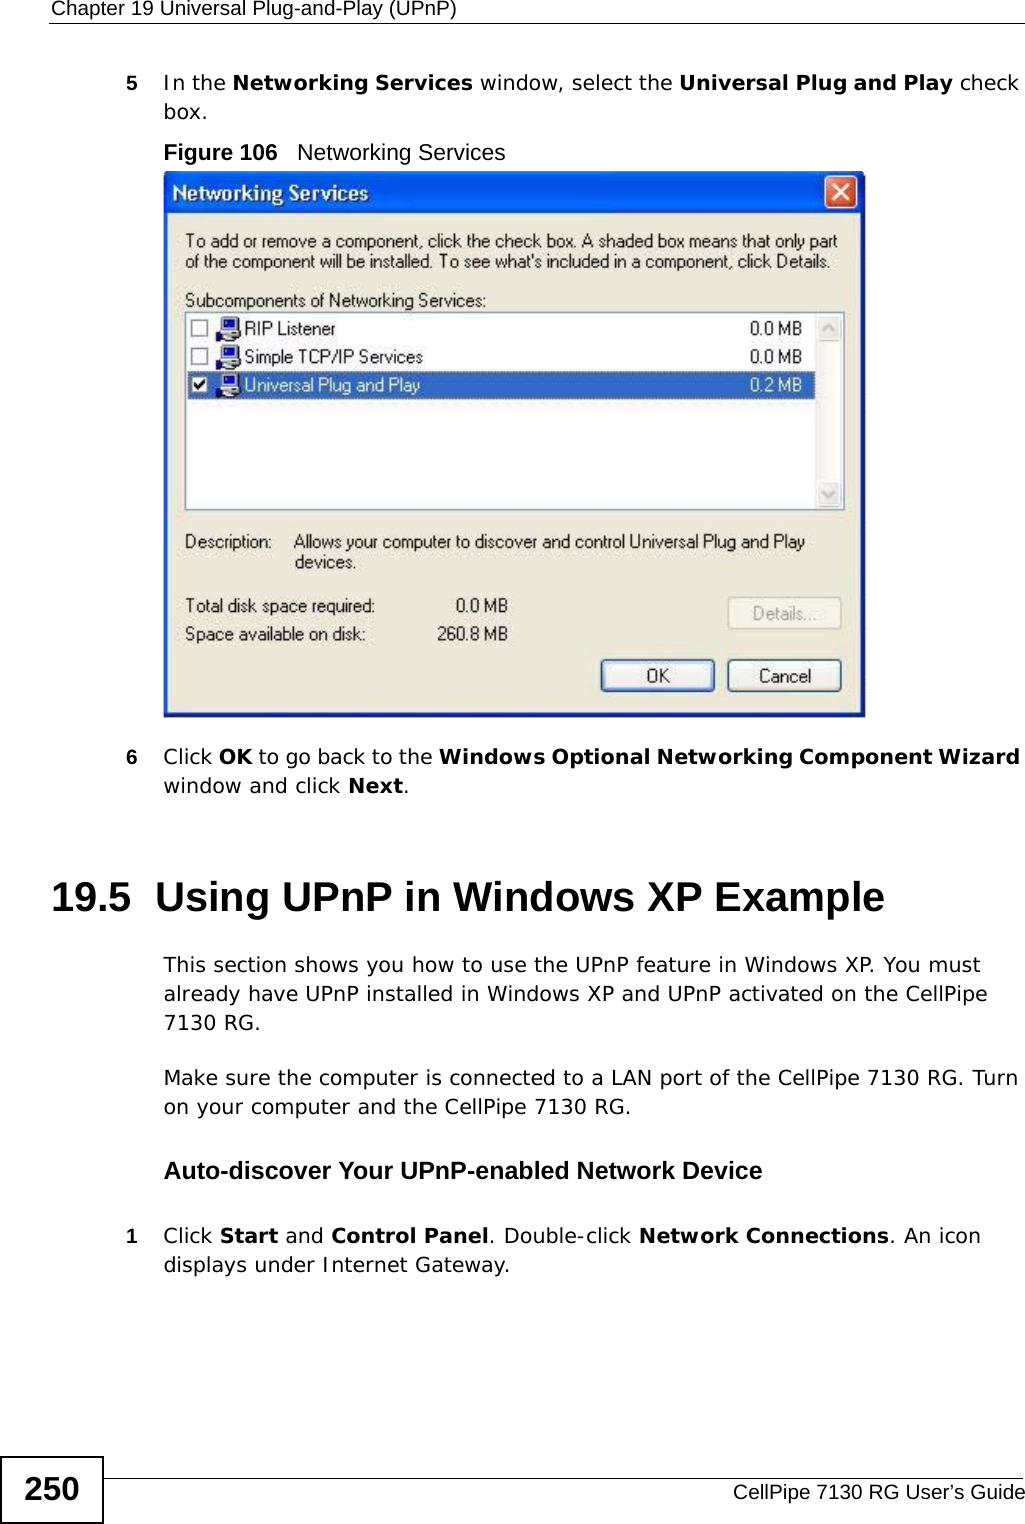 Chapter 19 Universal Plug-and-Play (UPnP)CellPipe 7130 RG User’s Guide2505In the Networking Services window, select the Universal Plug and Play check box. Figure 106   Networking Services6Click OK to go back to the Windows Optional Networking Component Wizard window and click Next. 19.5  Using UPnP in Windows XP ExampleThis section shows you how to use the UPnP feature in Windows XP. You must already have UPnP installed in Windows XP and UPnP activated on the CellPipe 7130 RG.Make sure the computer is connected to a LAN port of the CellPipe 7130 RG. Turn on your computer and the CellPipe 7130 RG. Auto-discover Your UPnP-enabled Network Device1Click Start and Control Panel. Double-click Network Connections. An icon displays under Internet Gateway.